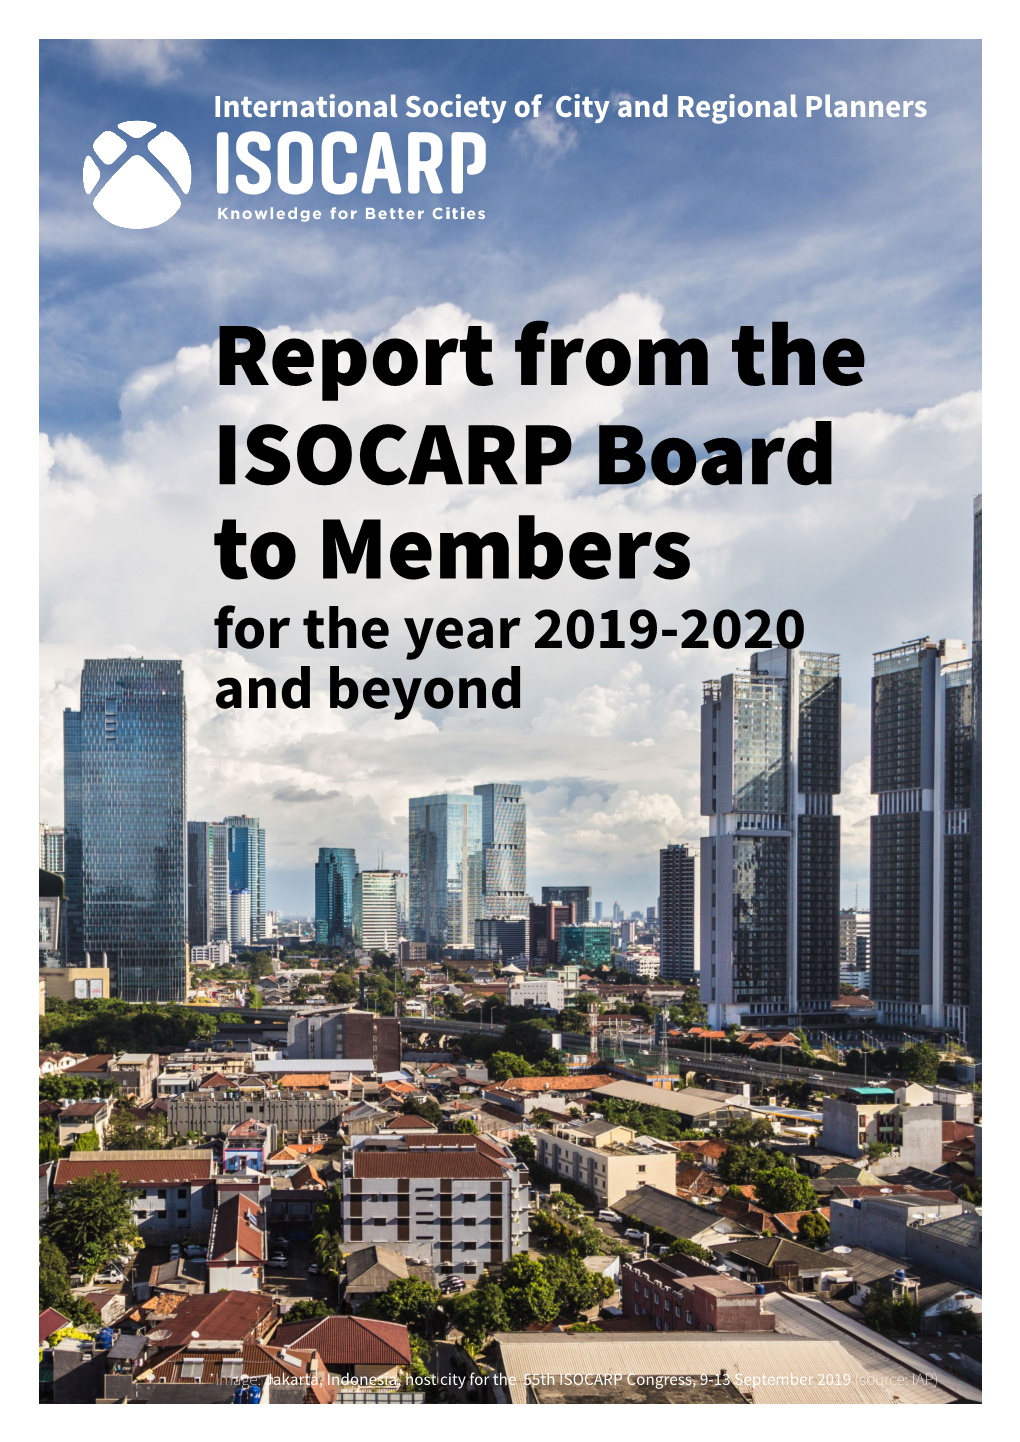 Report from the ISOCARP Board to Members for the Year 2019-2020 and Beyond